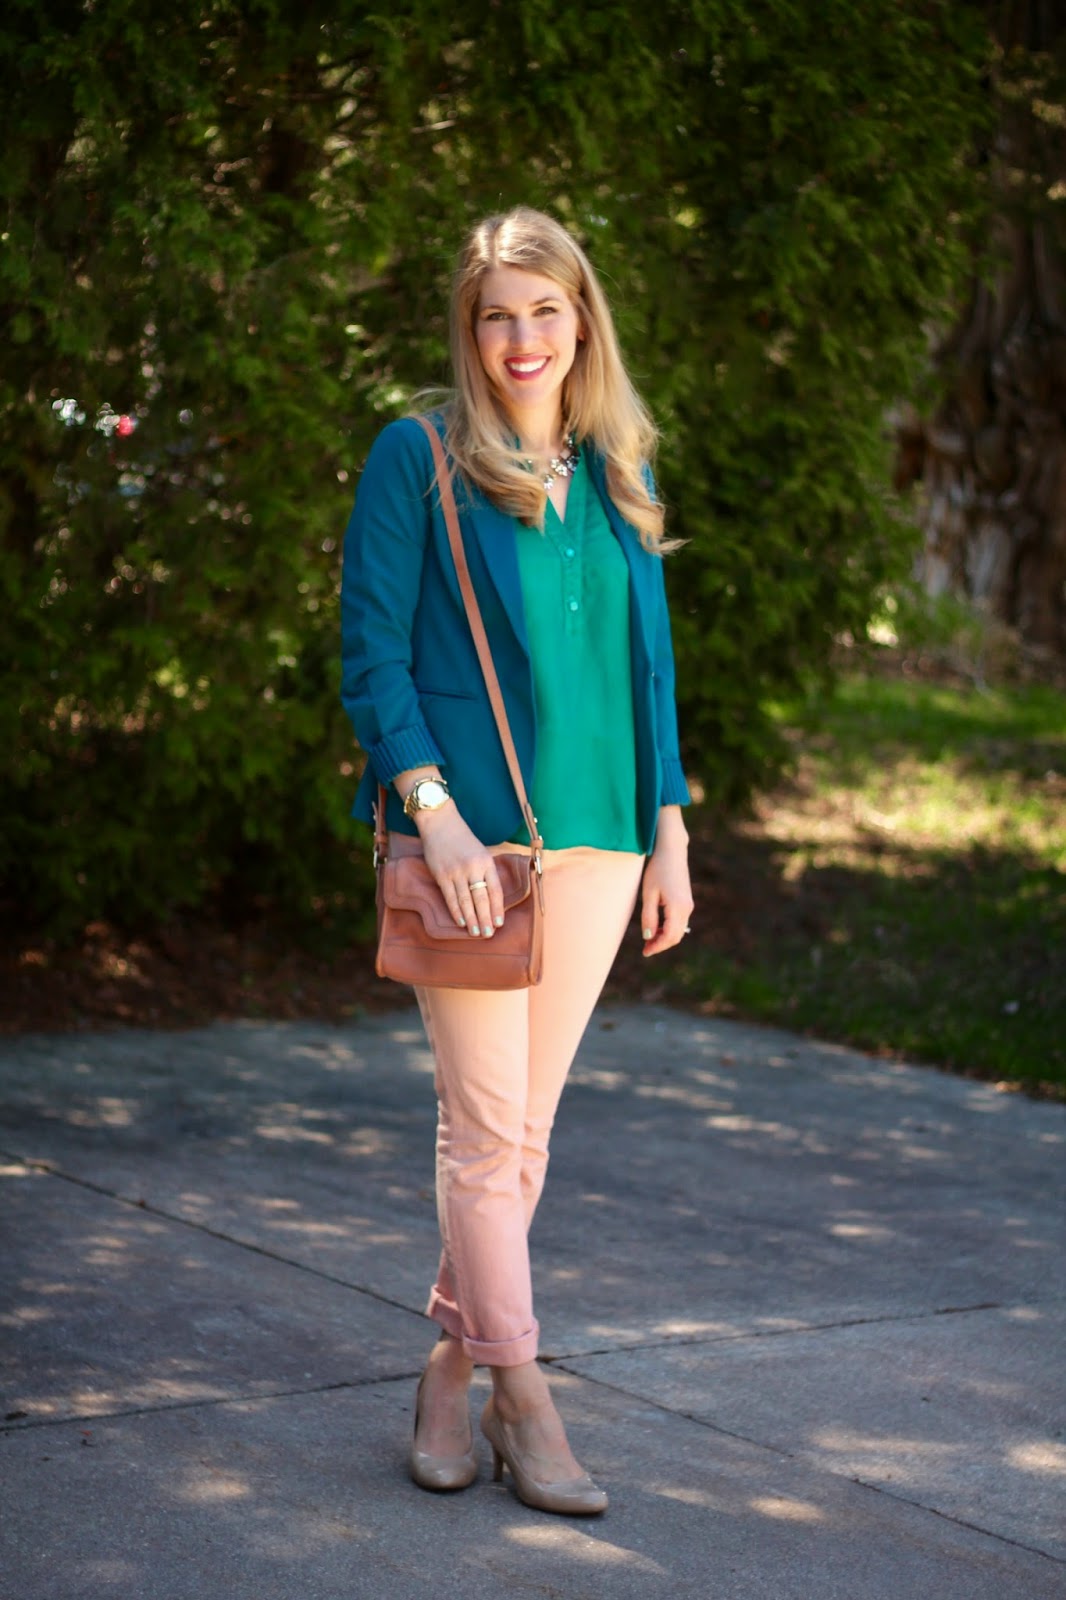 Blush Jeans and Teal